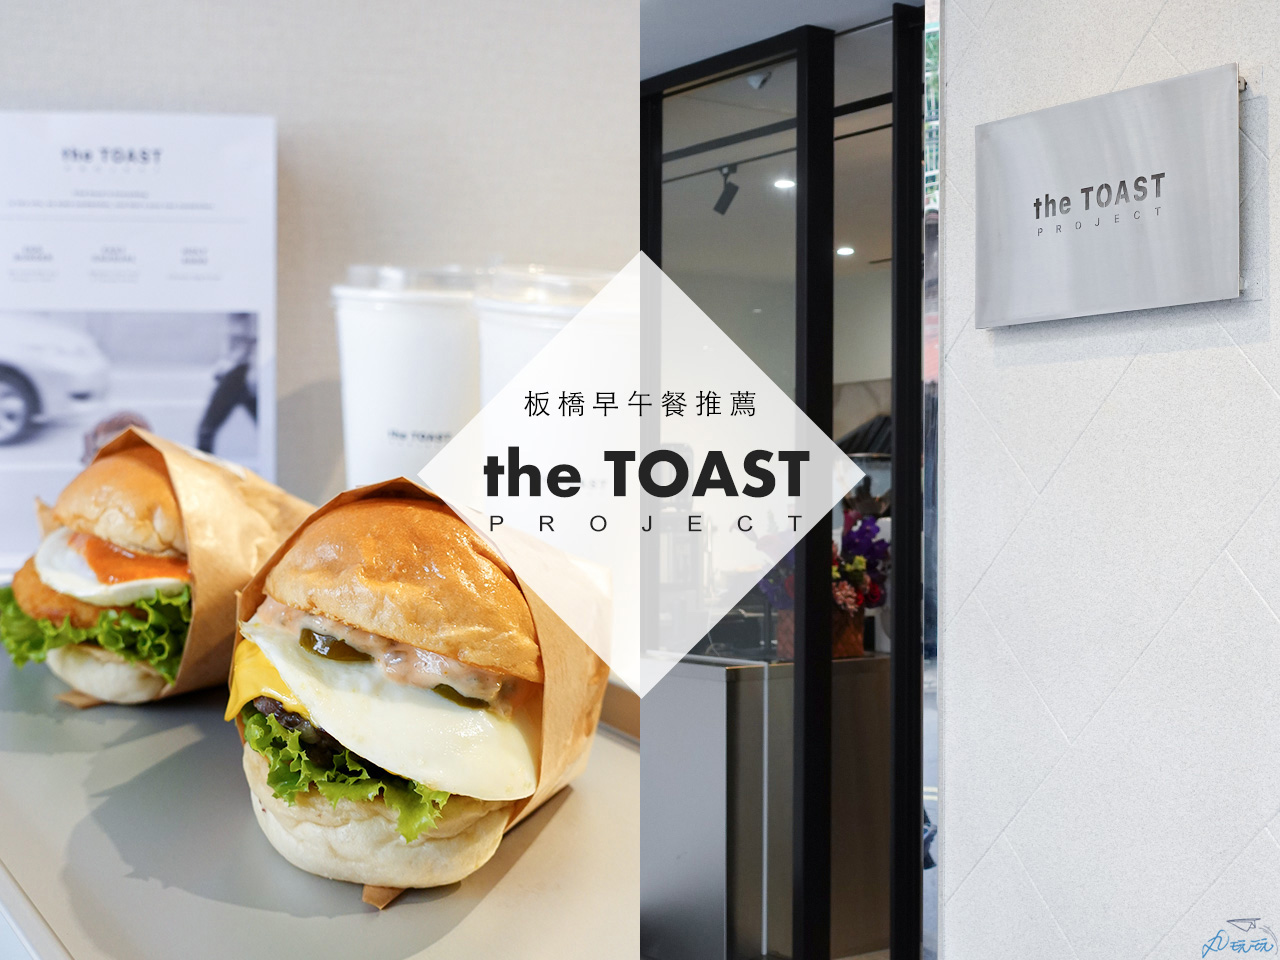 You are currently viewing the TOAST PROJECT｜質感平價三明治漢堡，板橋早午餐店新秀